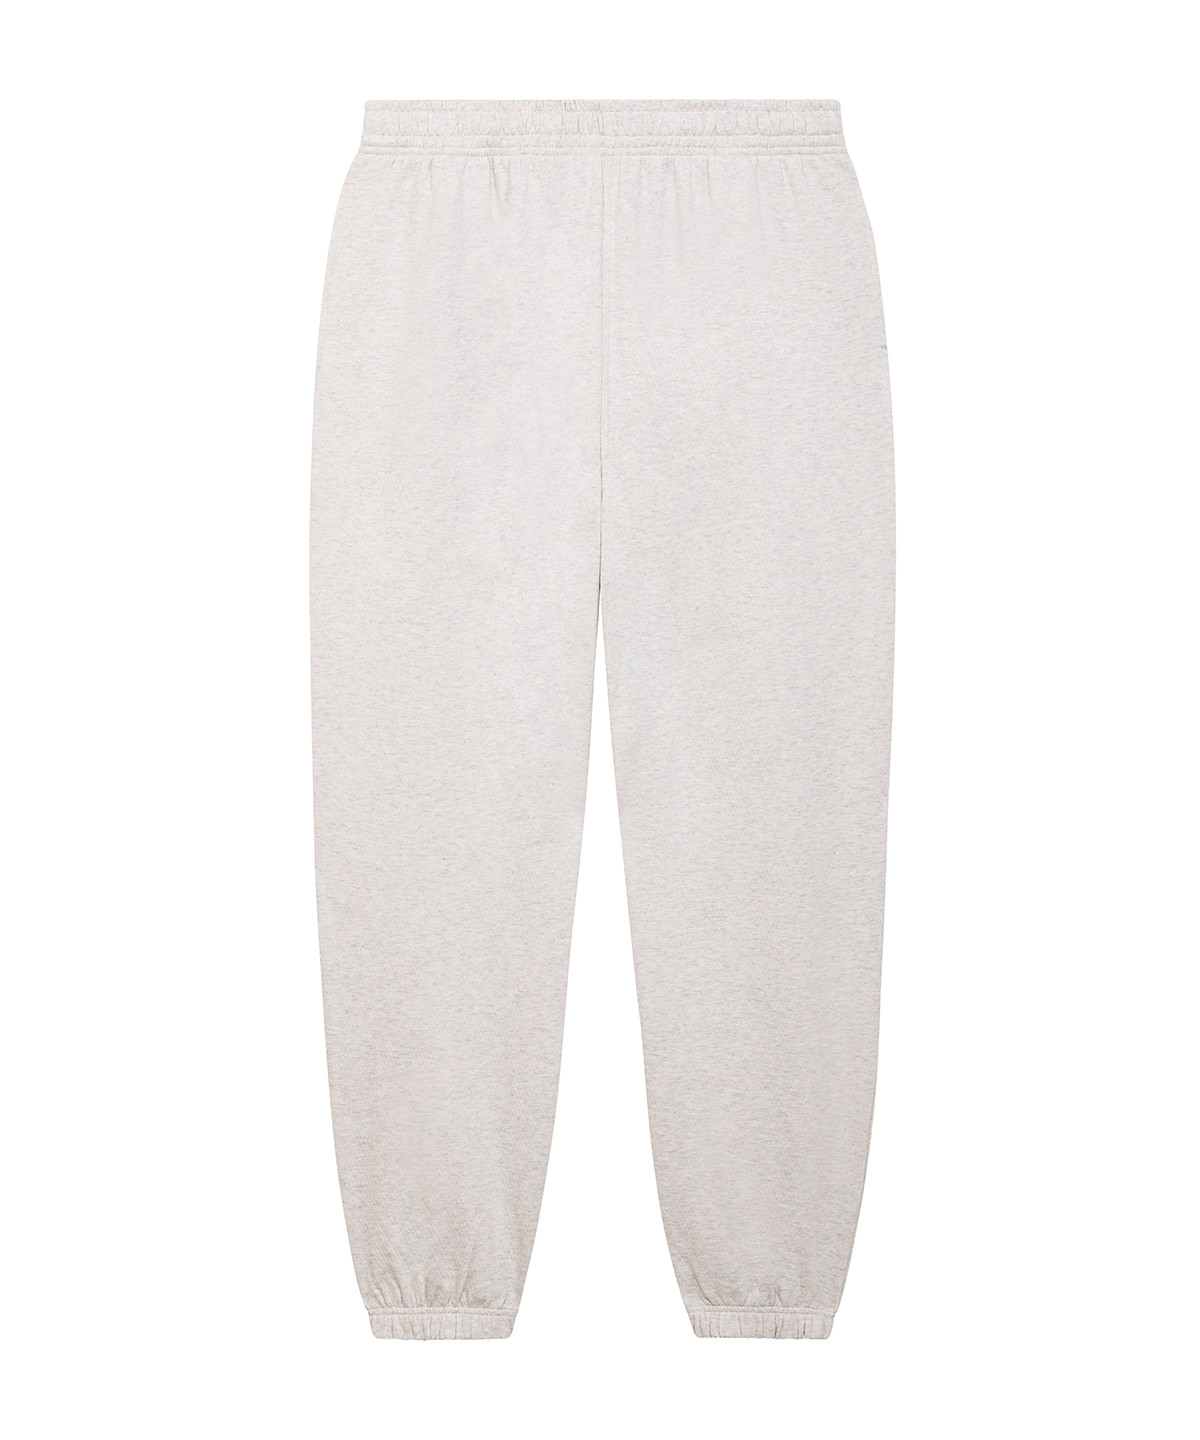 stanley/stella Decker Wave Terry relaxed fit jogger pants